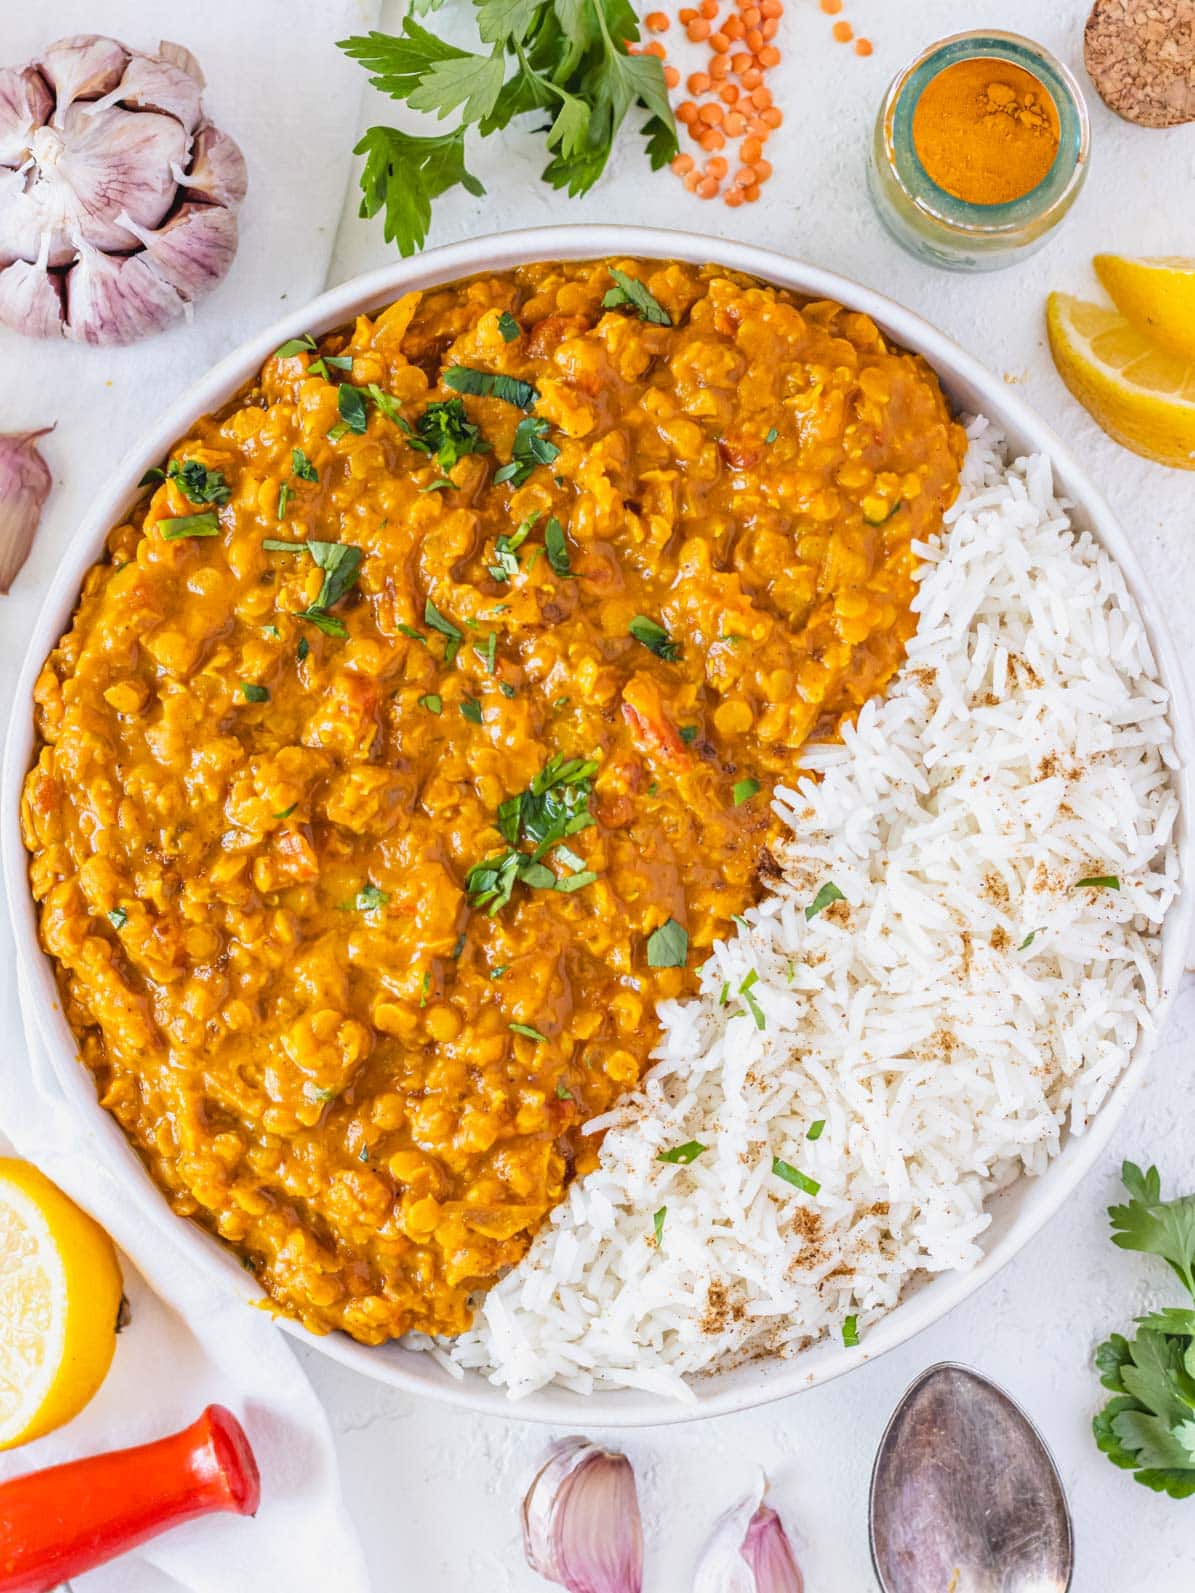 Lentil curry with basmati rice and lemon wedges